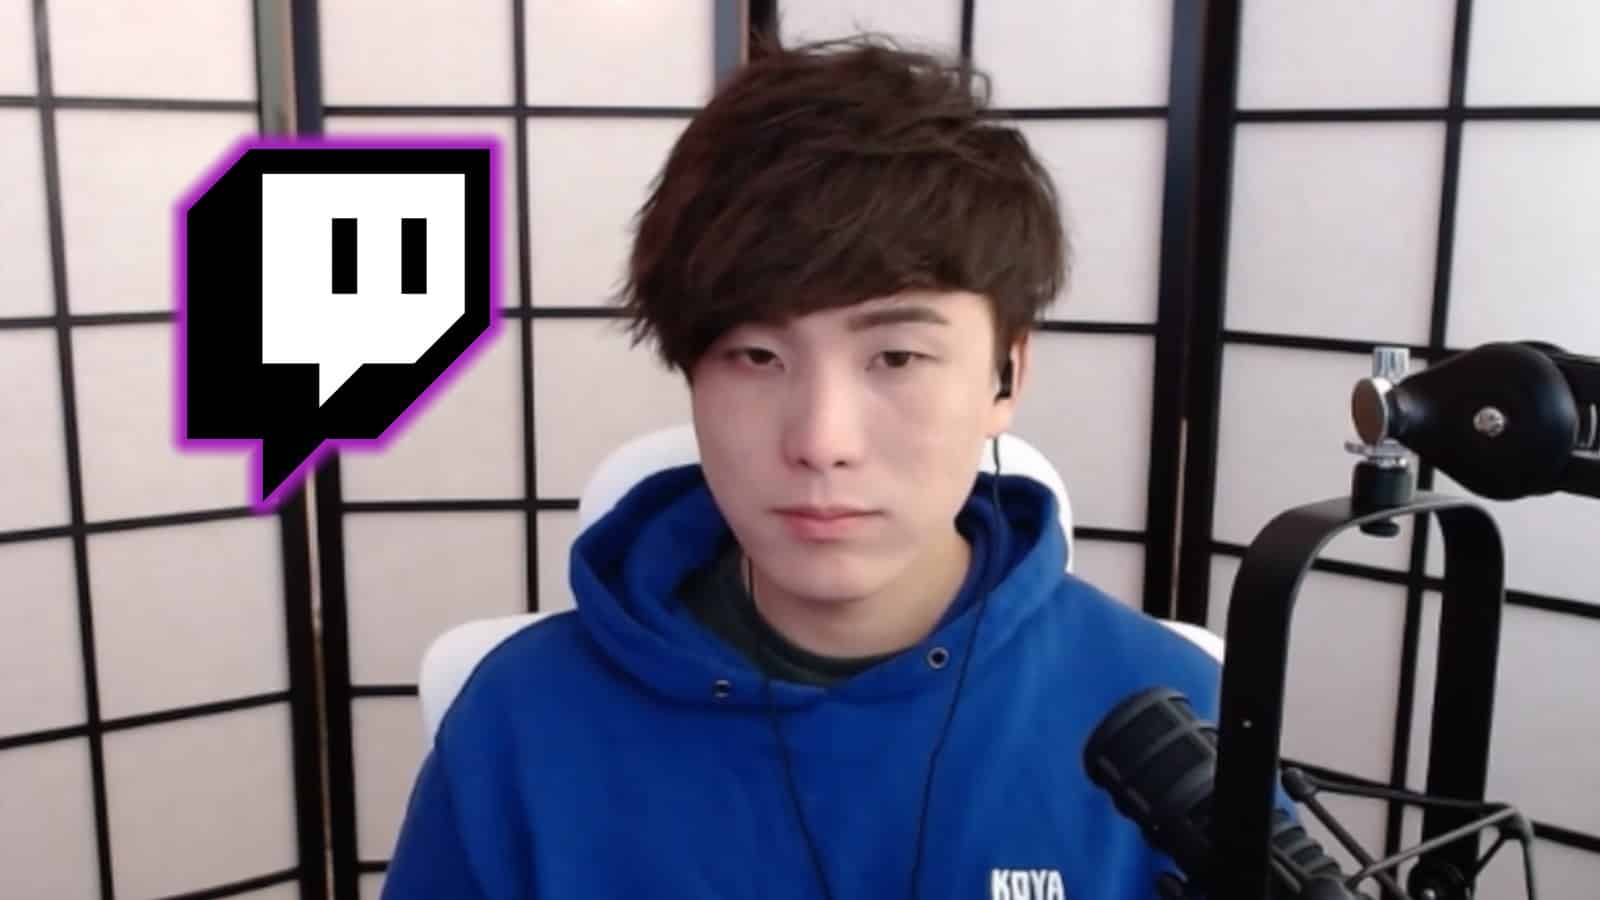 Sykkuno worried about Twitch changes